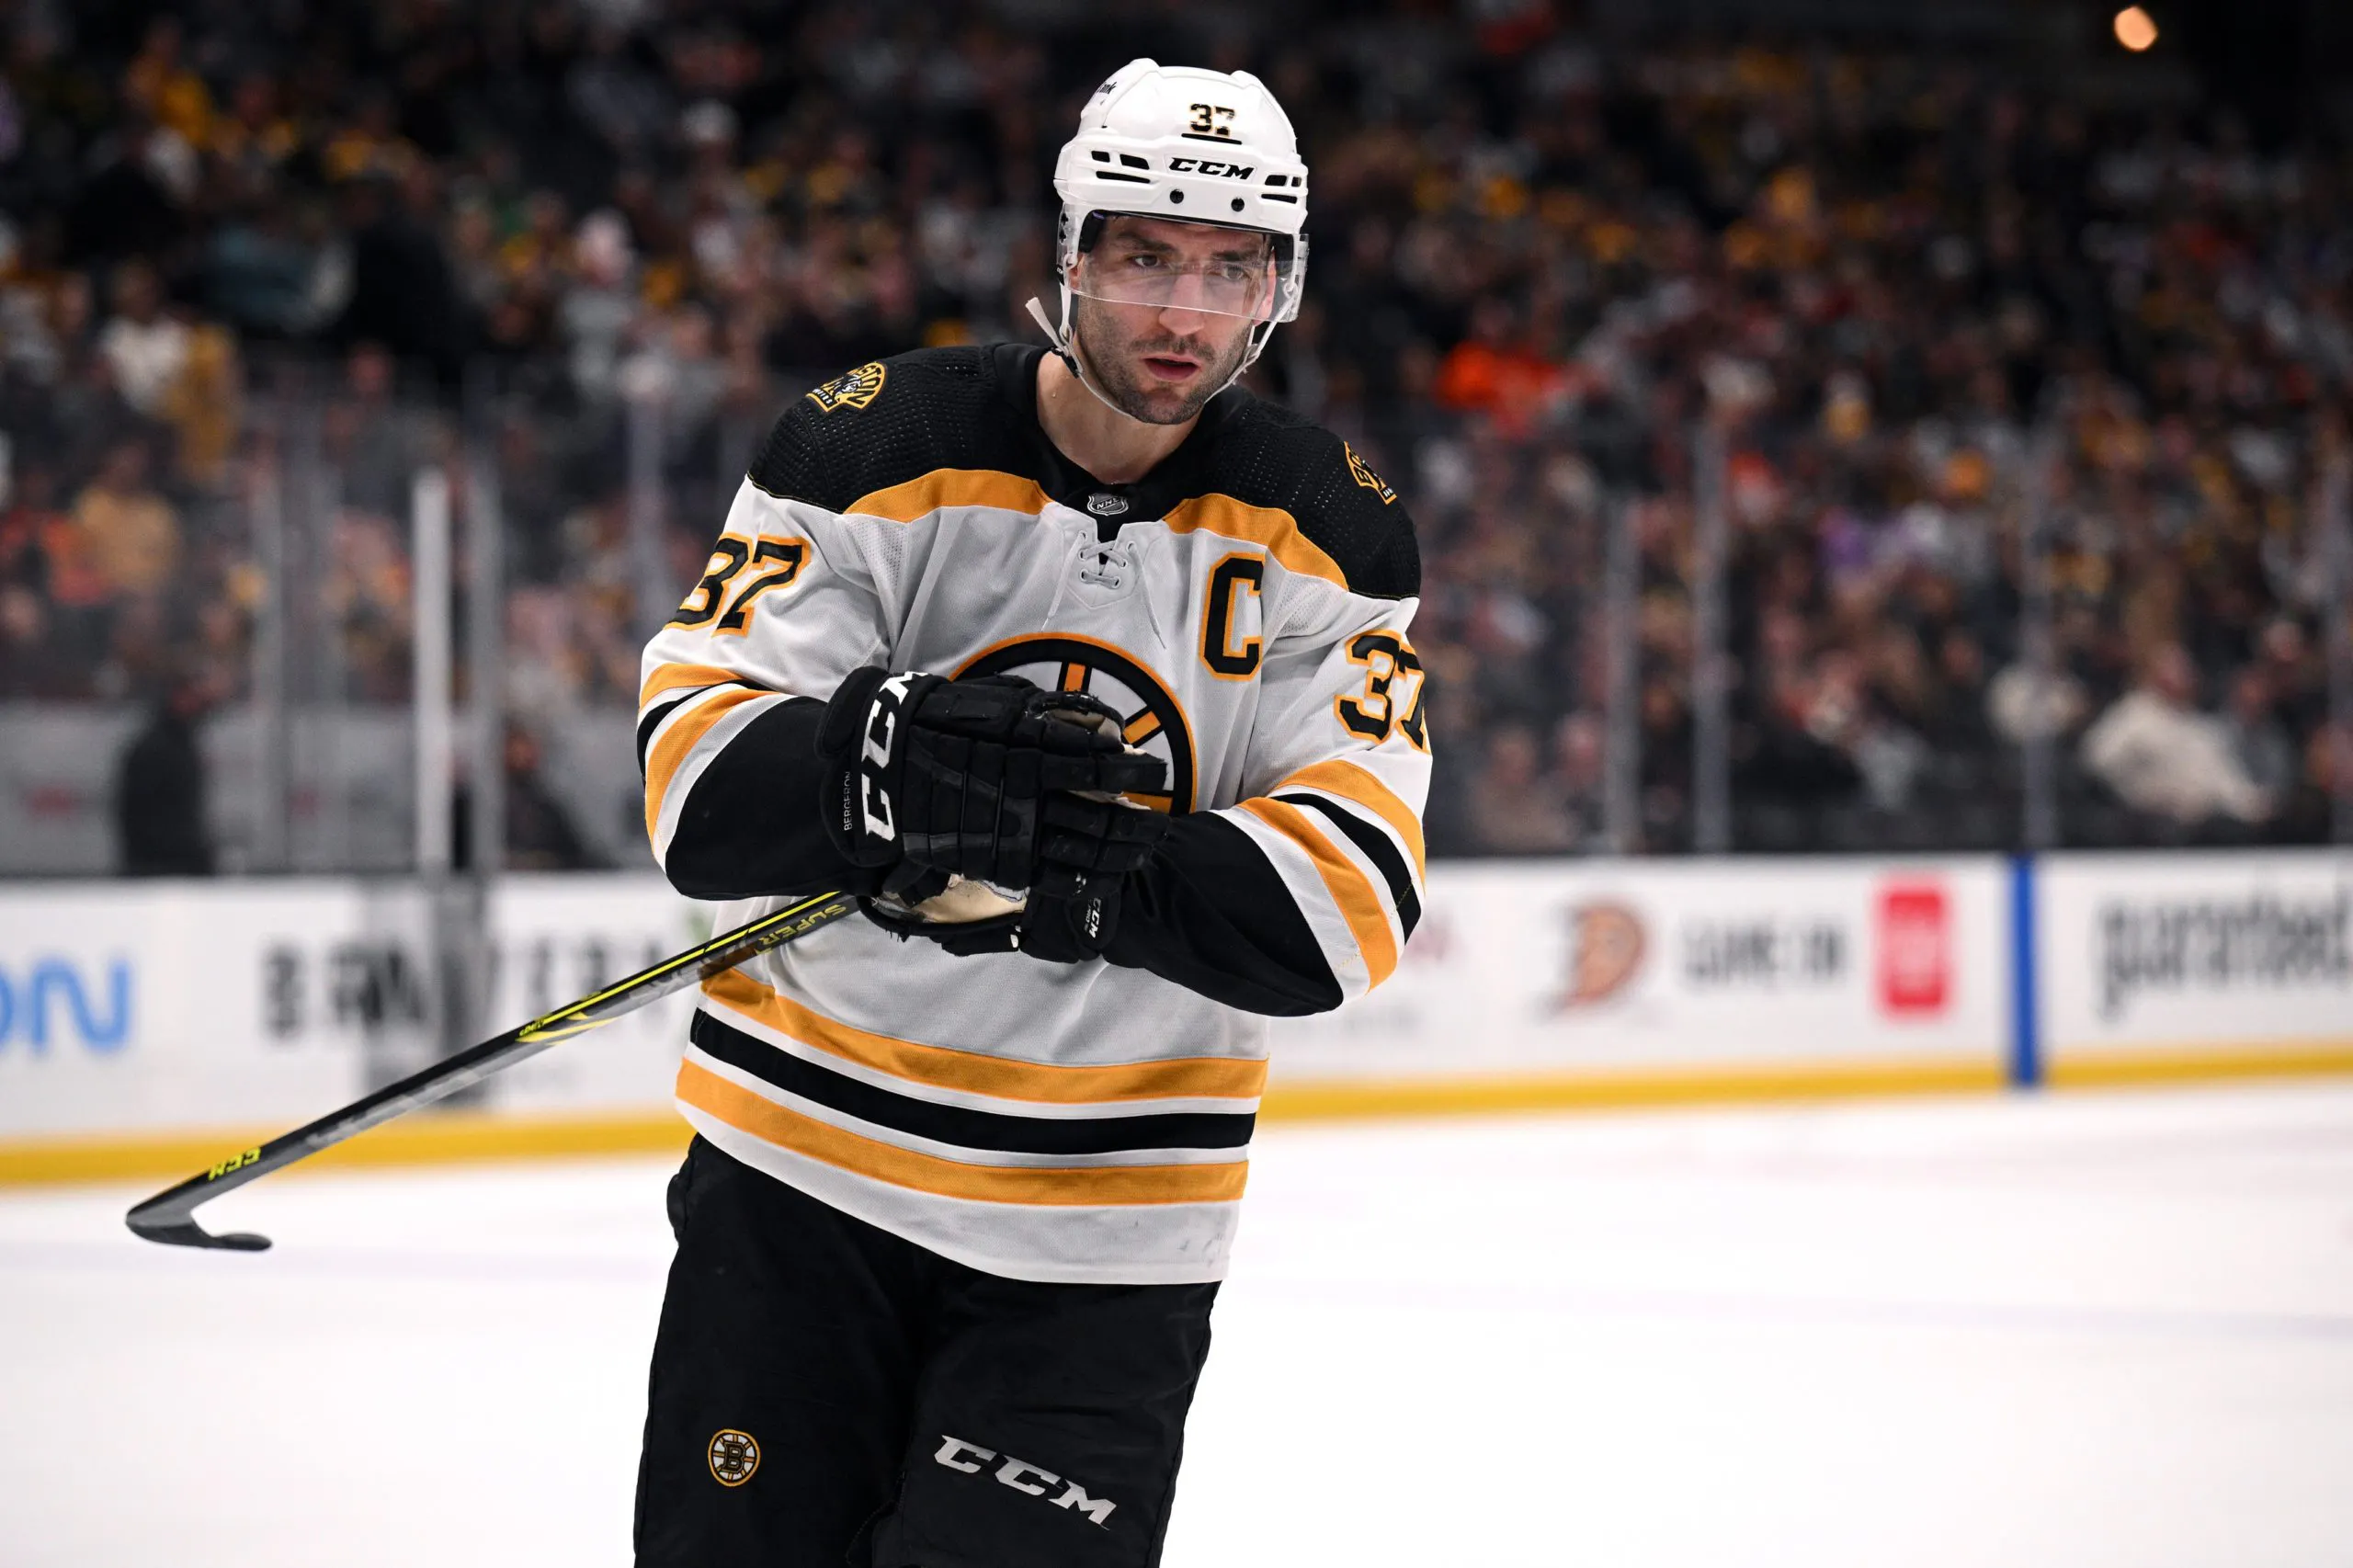 Boston Bruin re-sign Patrice Bergeron to one-year, $2.5 million contract